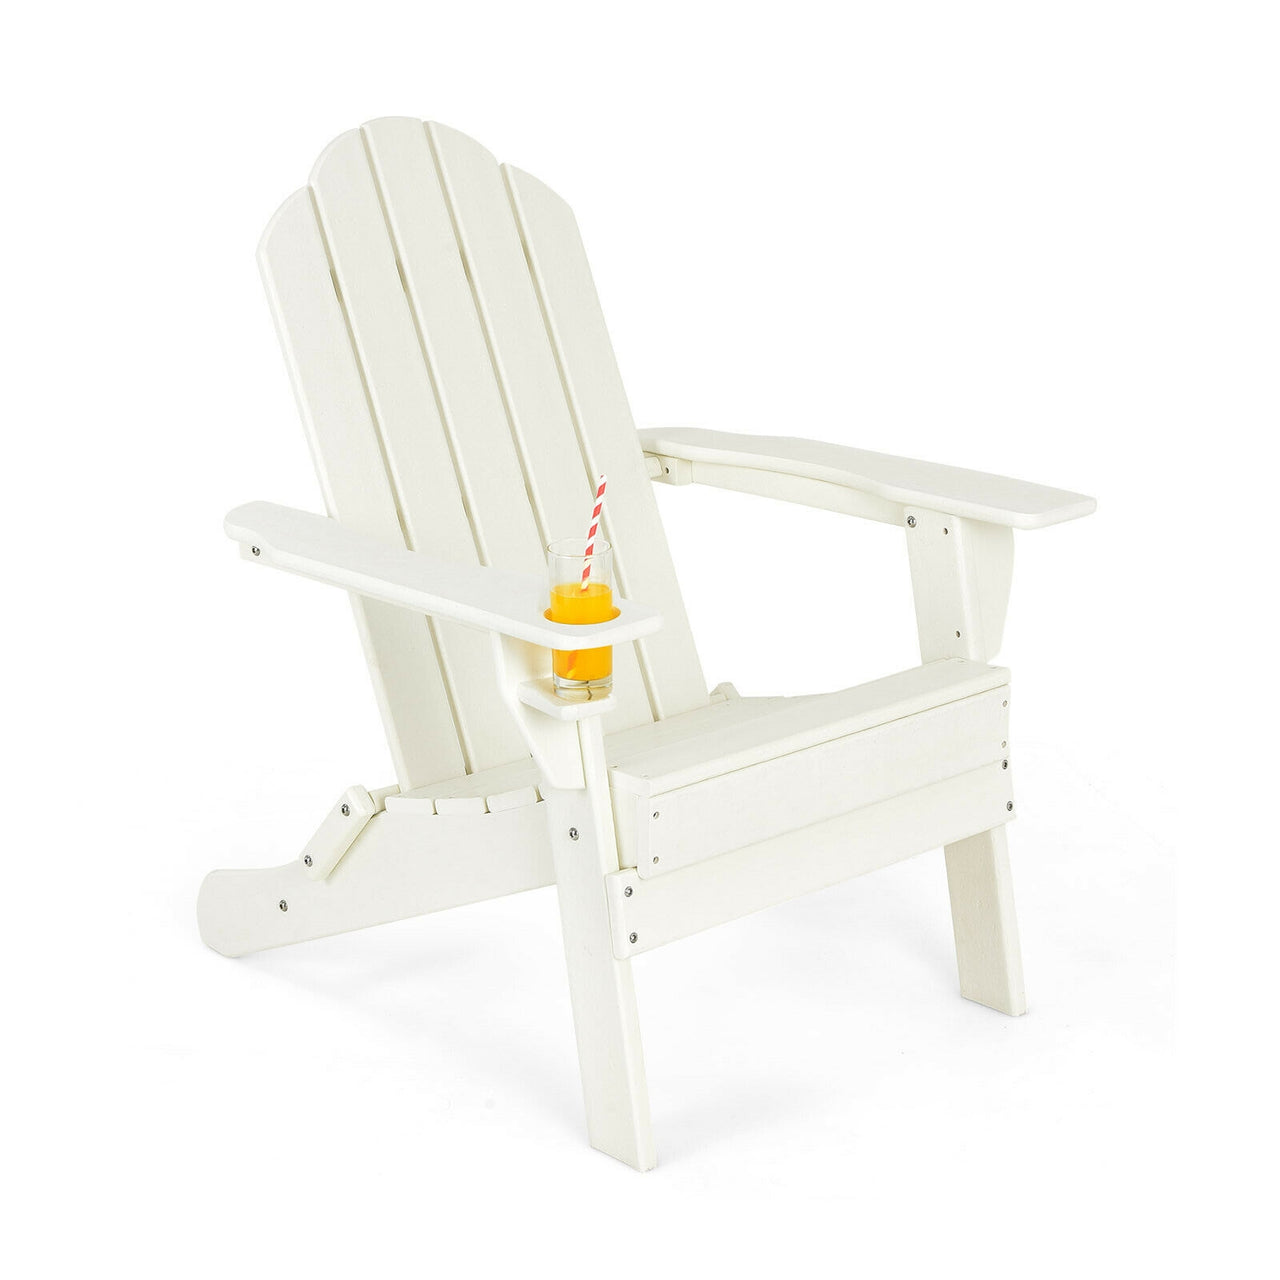 Foldable Weather Resistant Patio Chair with Built-in Cup Holder - Gallery View 8 of 11